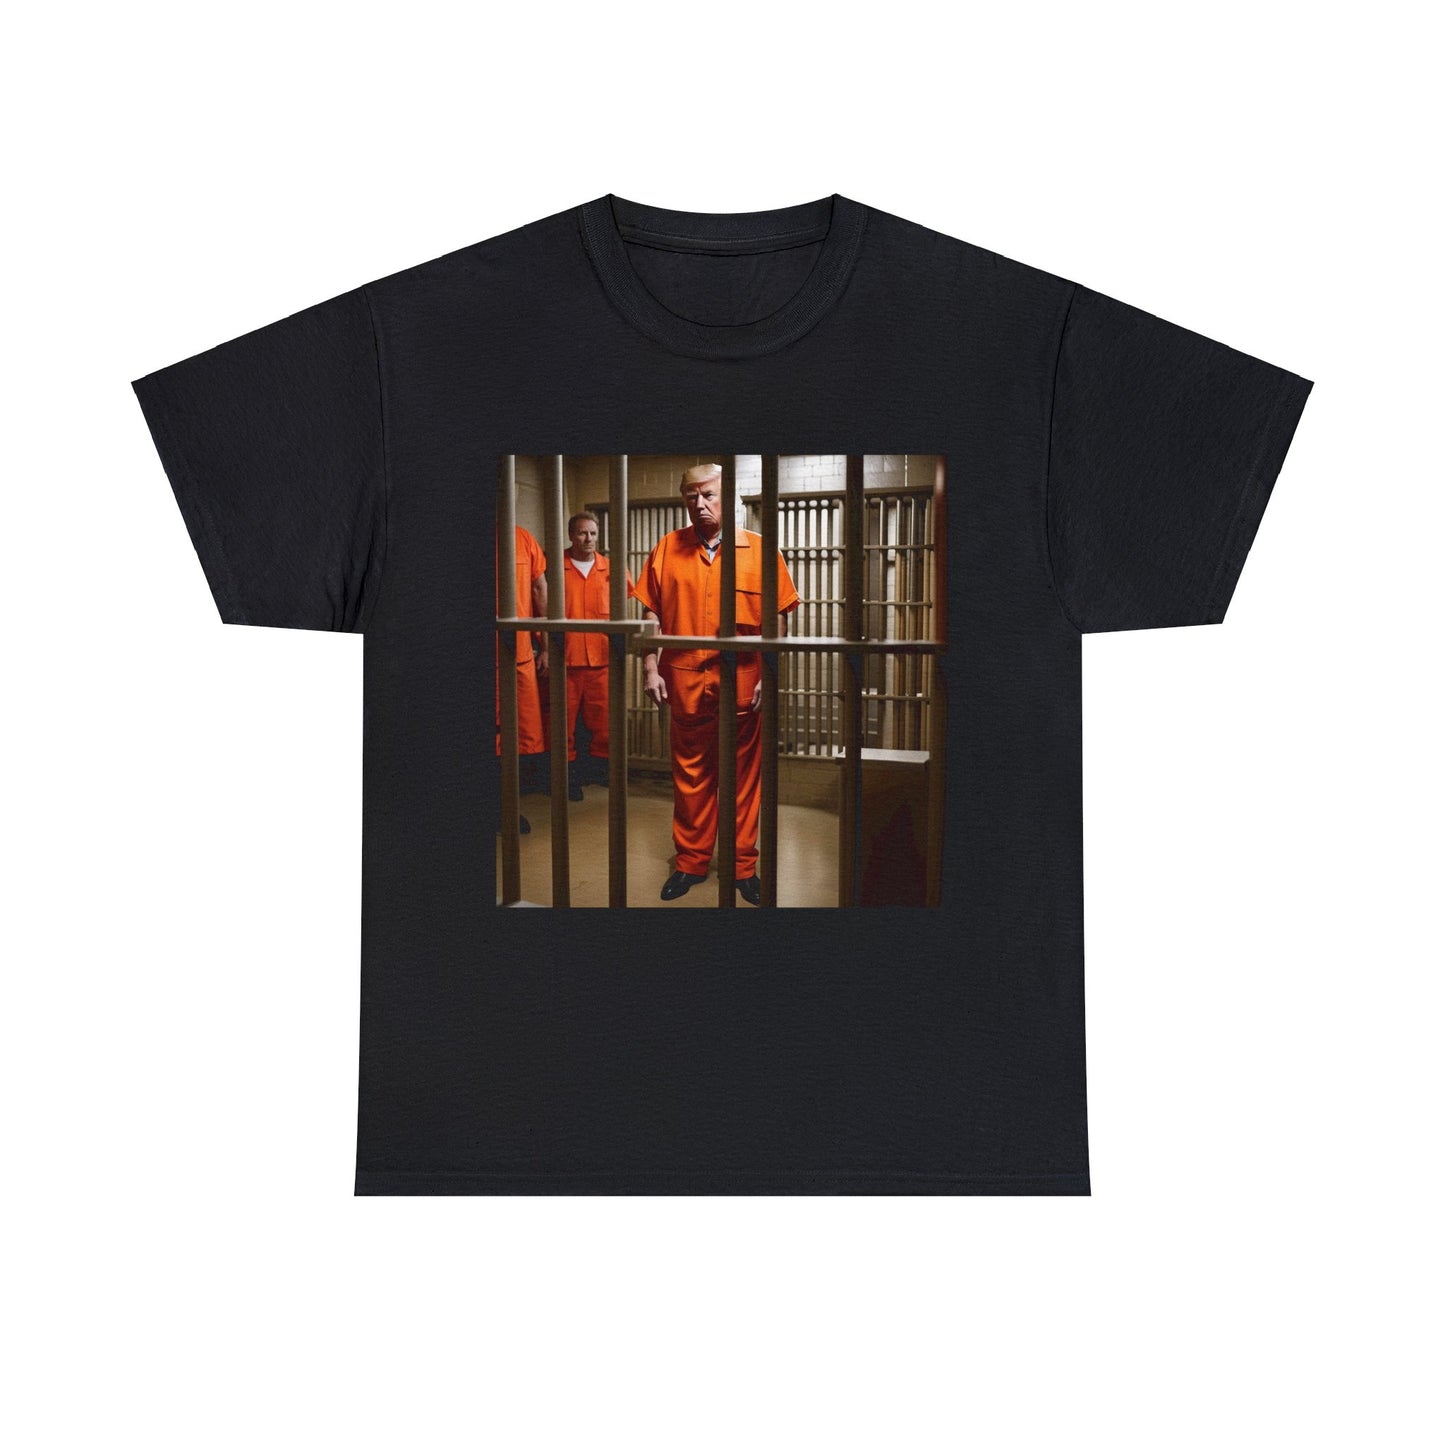 front: DT waits in a holding cell, wearing orange jmpsuit. back: Emannuel Kant quote